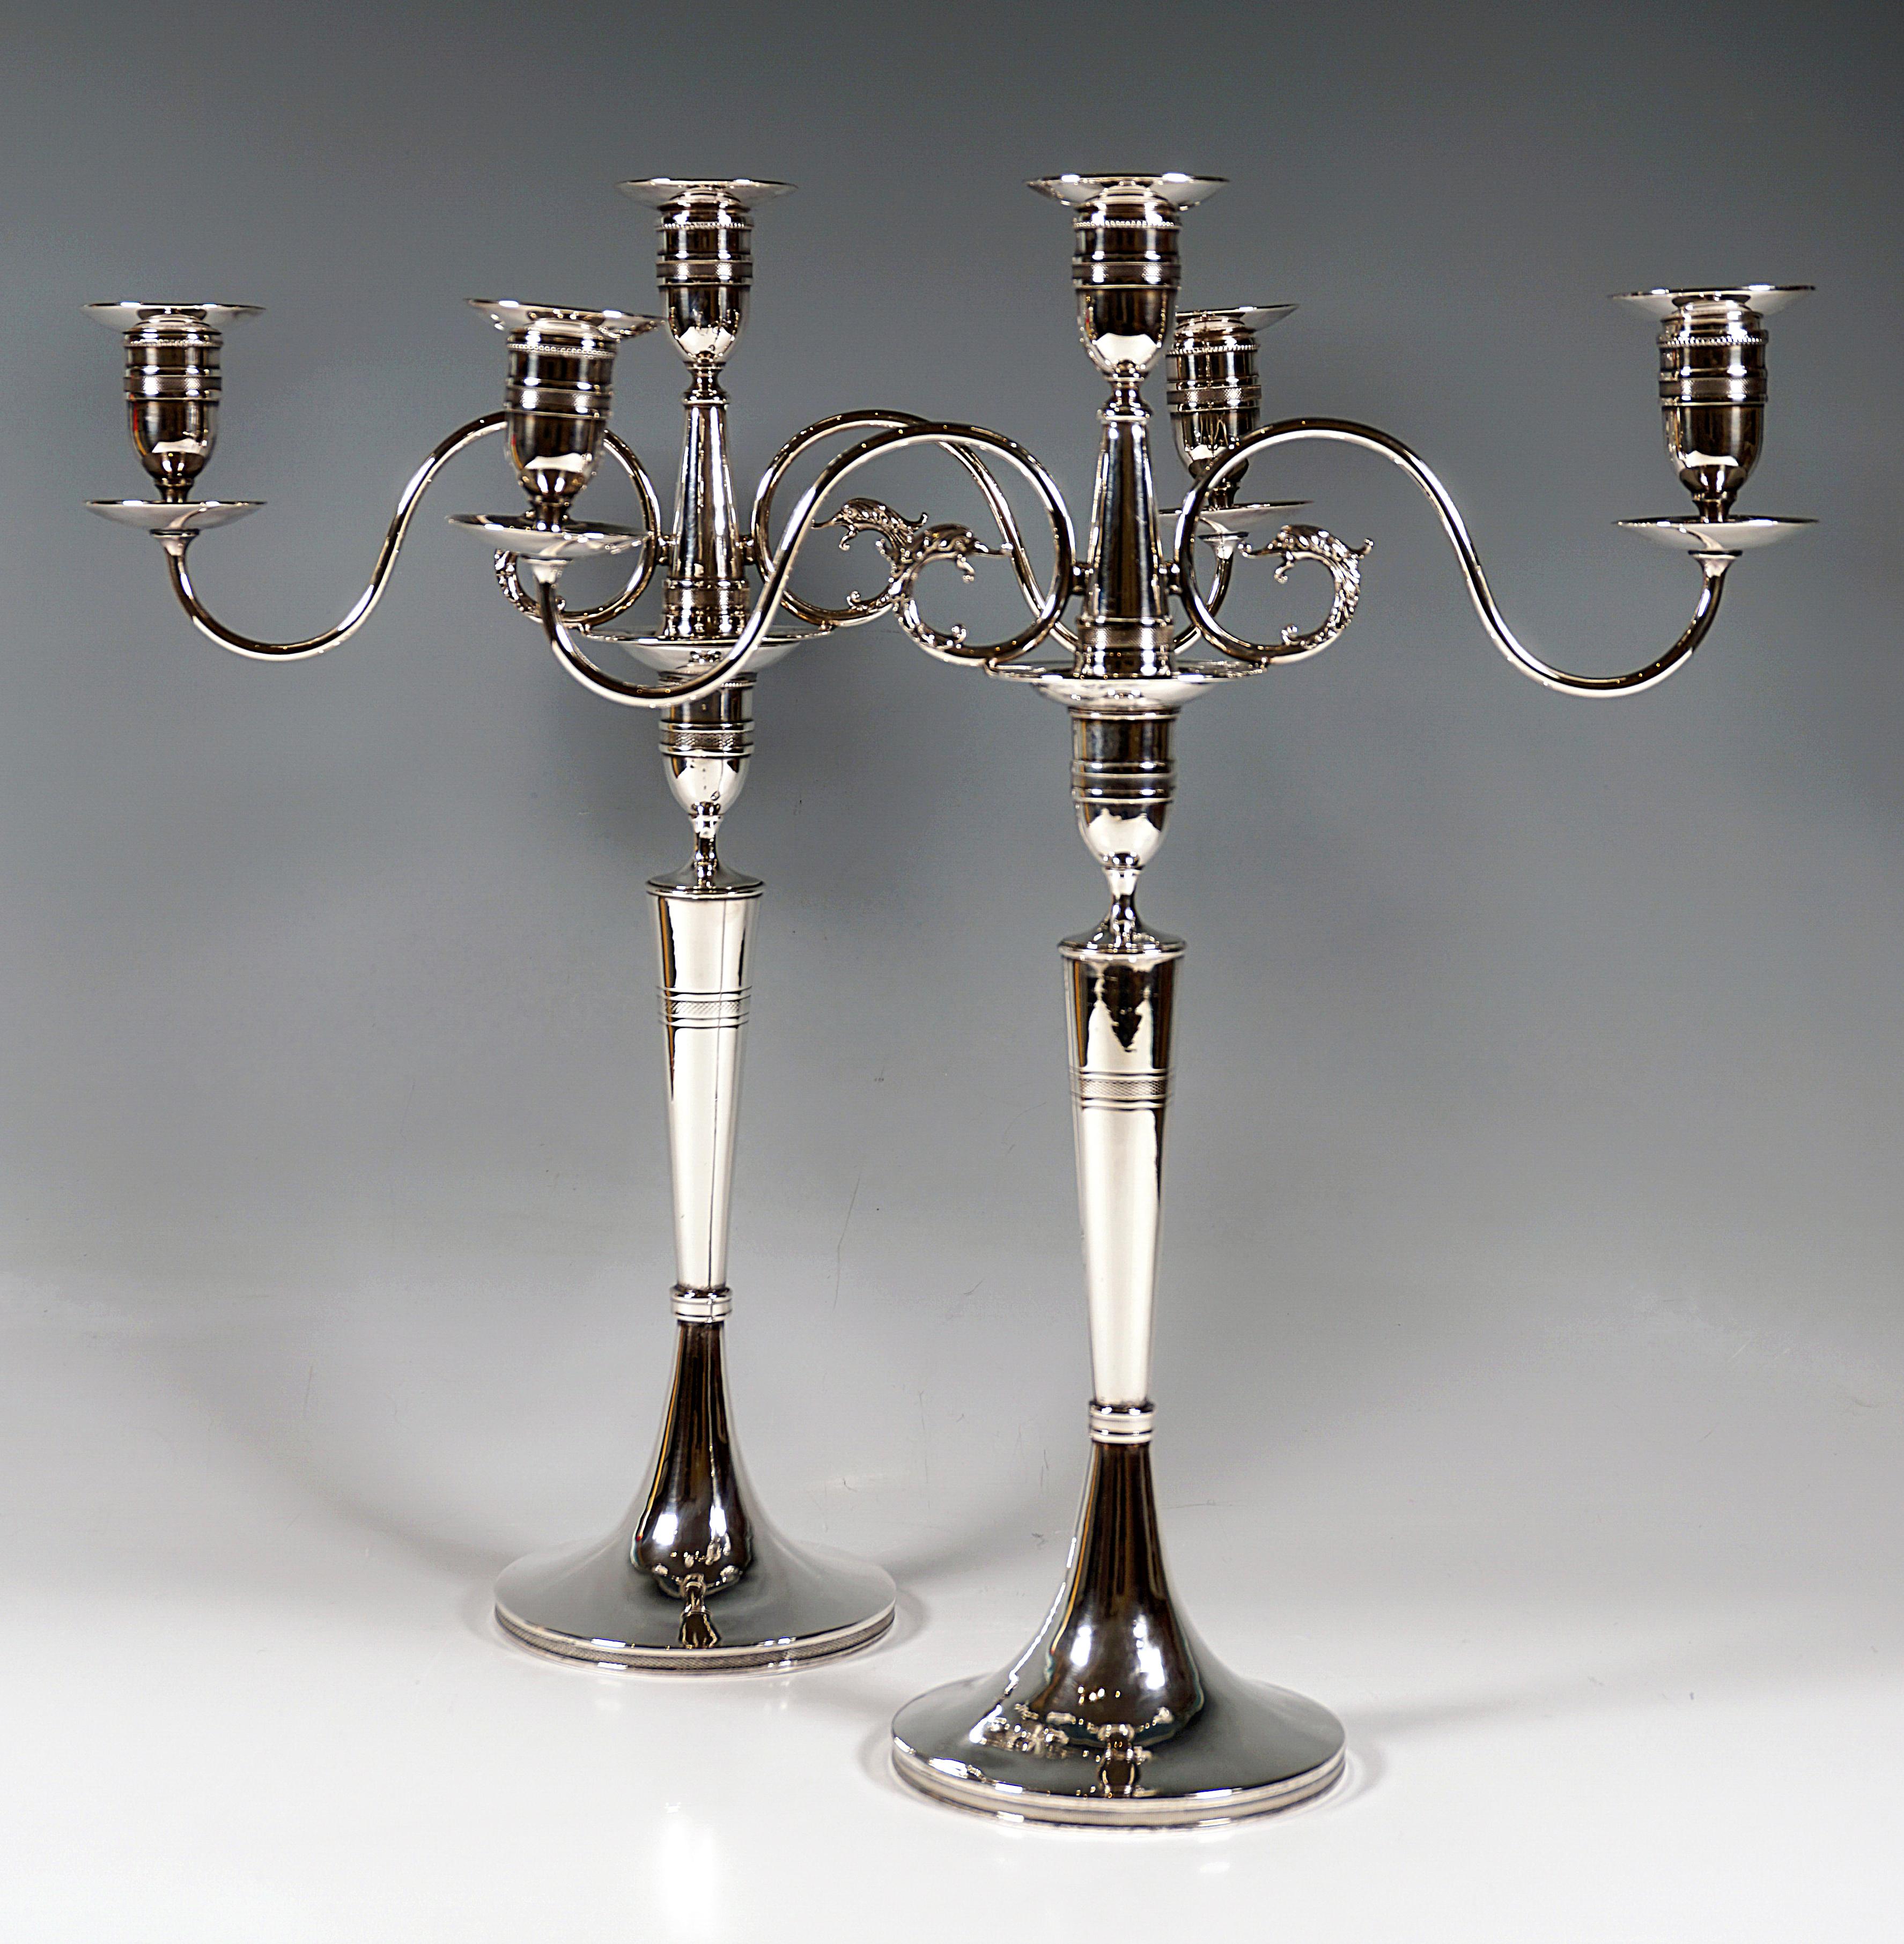 Two elegant 3-flame silver girandoles on a round base, smooth shaft raised in the centre, the lower third constricted by a profiled beaded ring, the shaft widening conically towards the top, a vase-shaped spout on top as a holder for the top piece